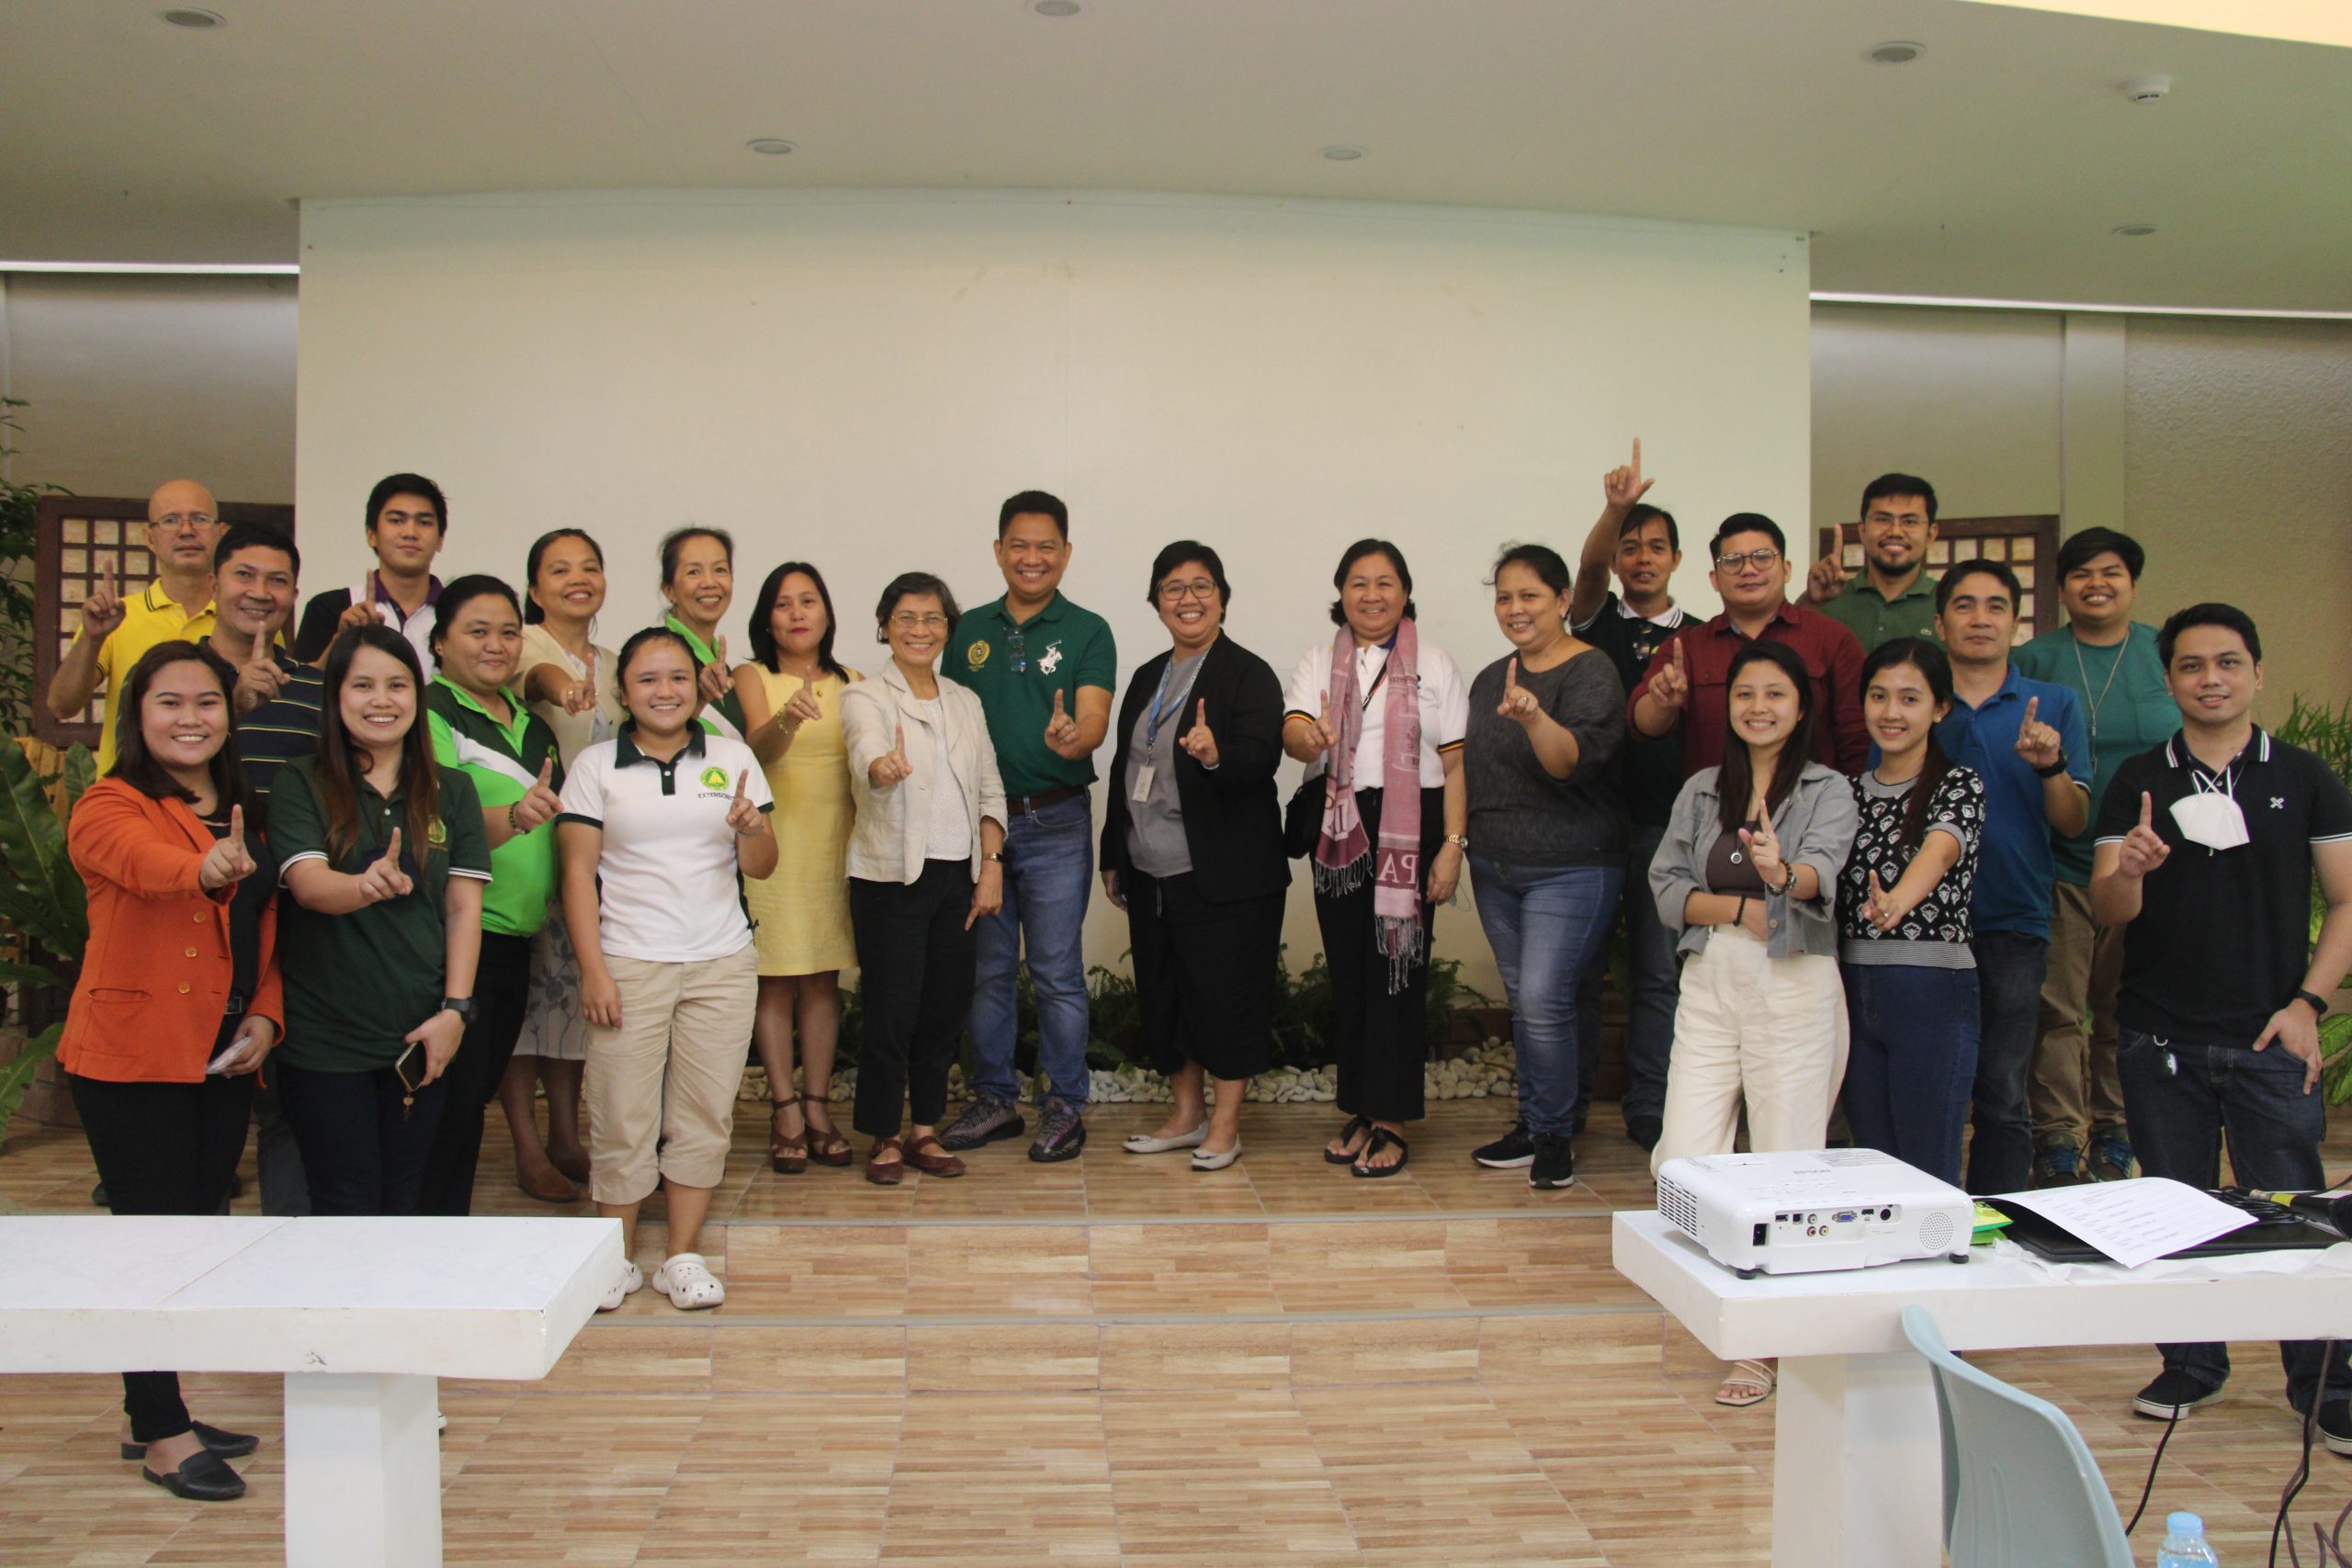 DOST V CONDUCTS ORIENTATION ON FOB, SCITECH SUPERHIGHWAY, TECHNICOM TO CBSUA FACULTY RESEARCHERS